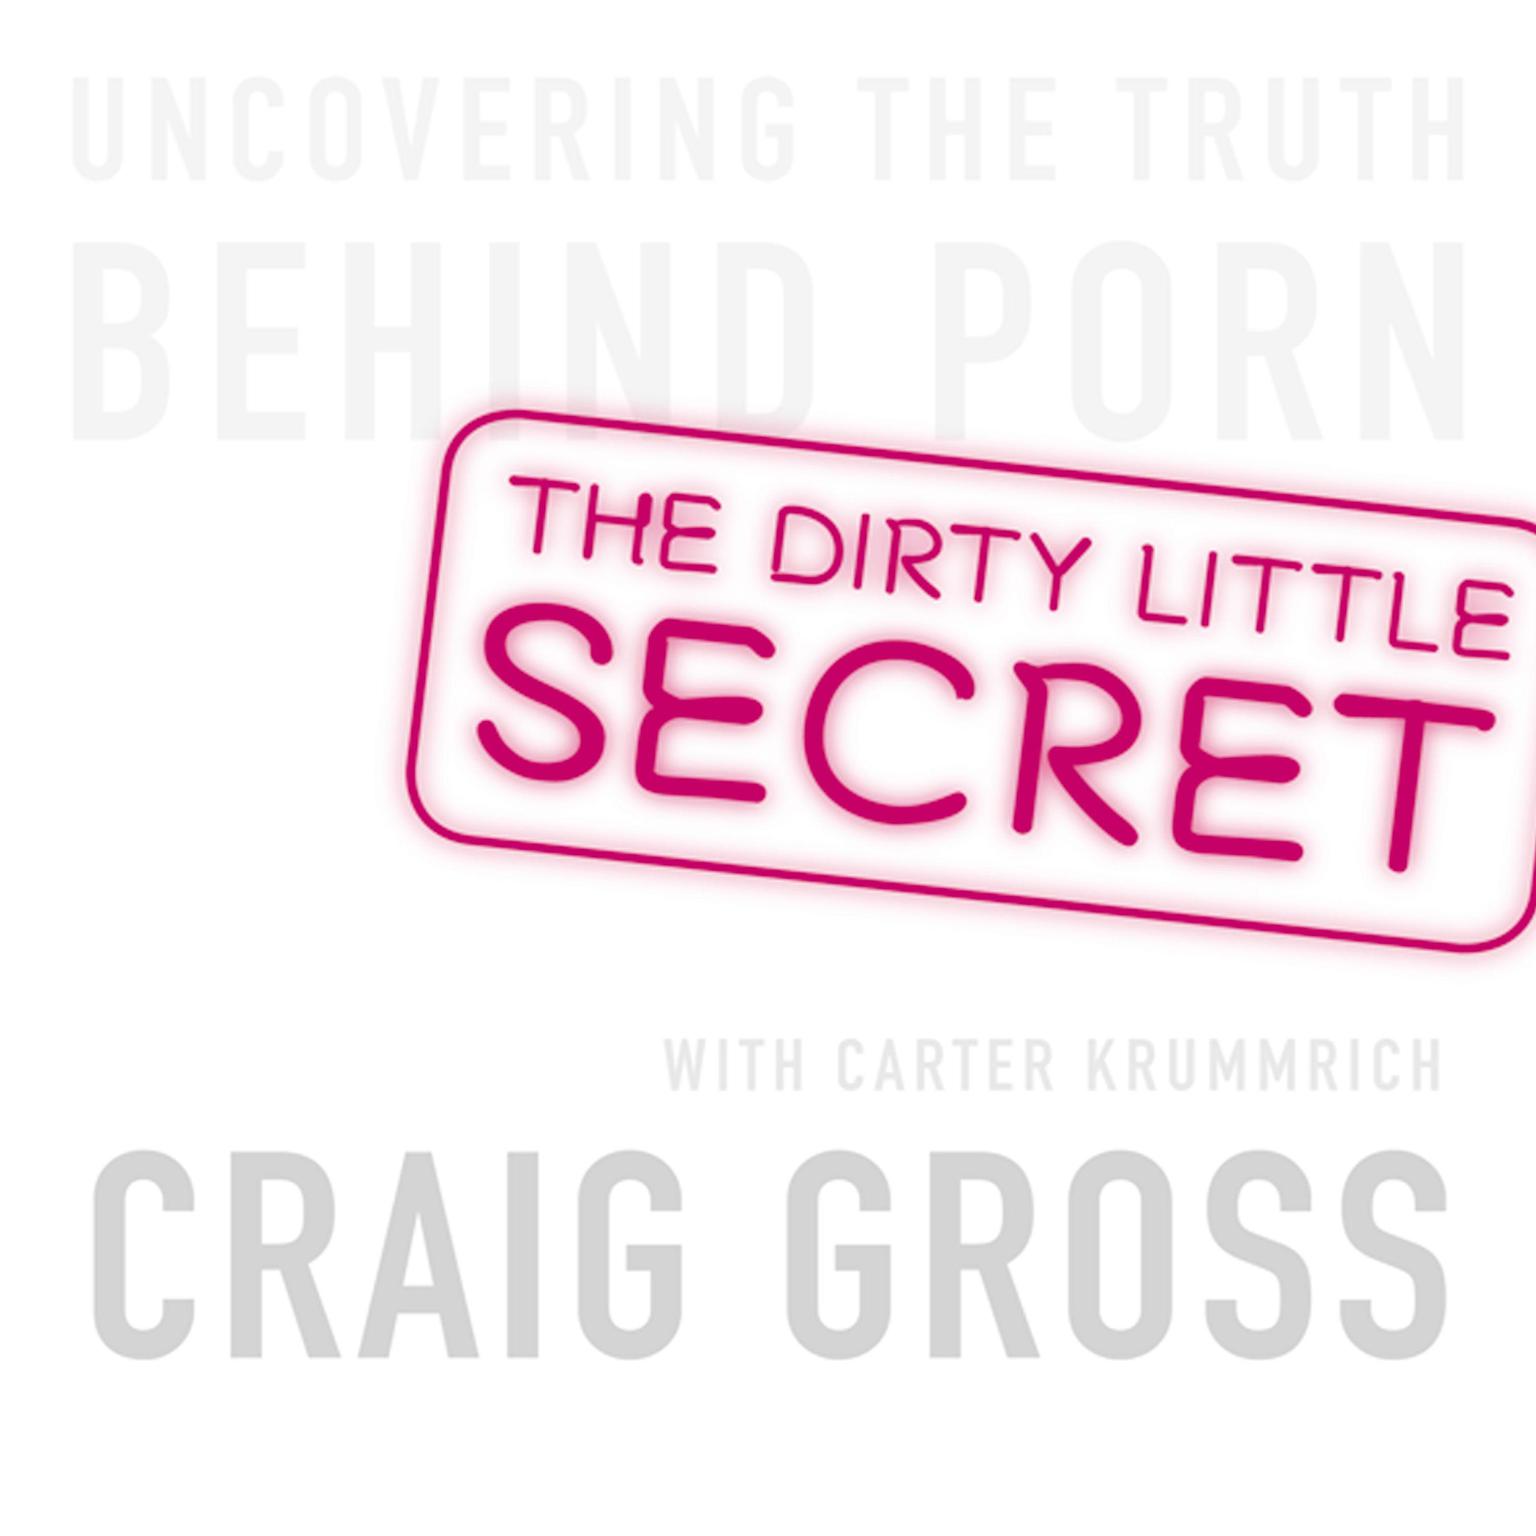 The Dirty Little Secret: Uncovering the Truth Behind Porn Audiobook, by Craig Gross